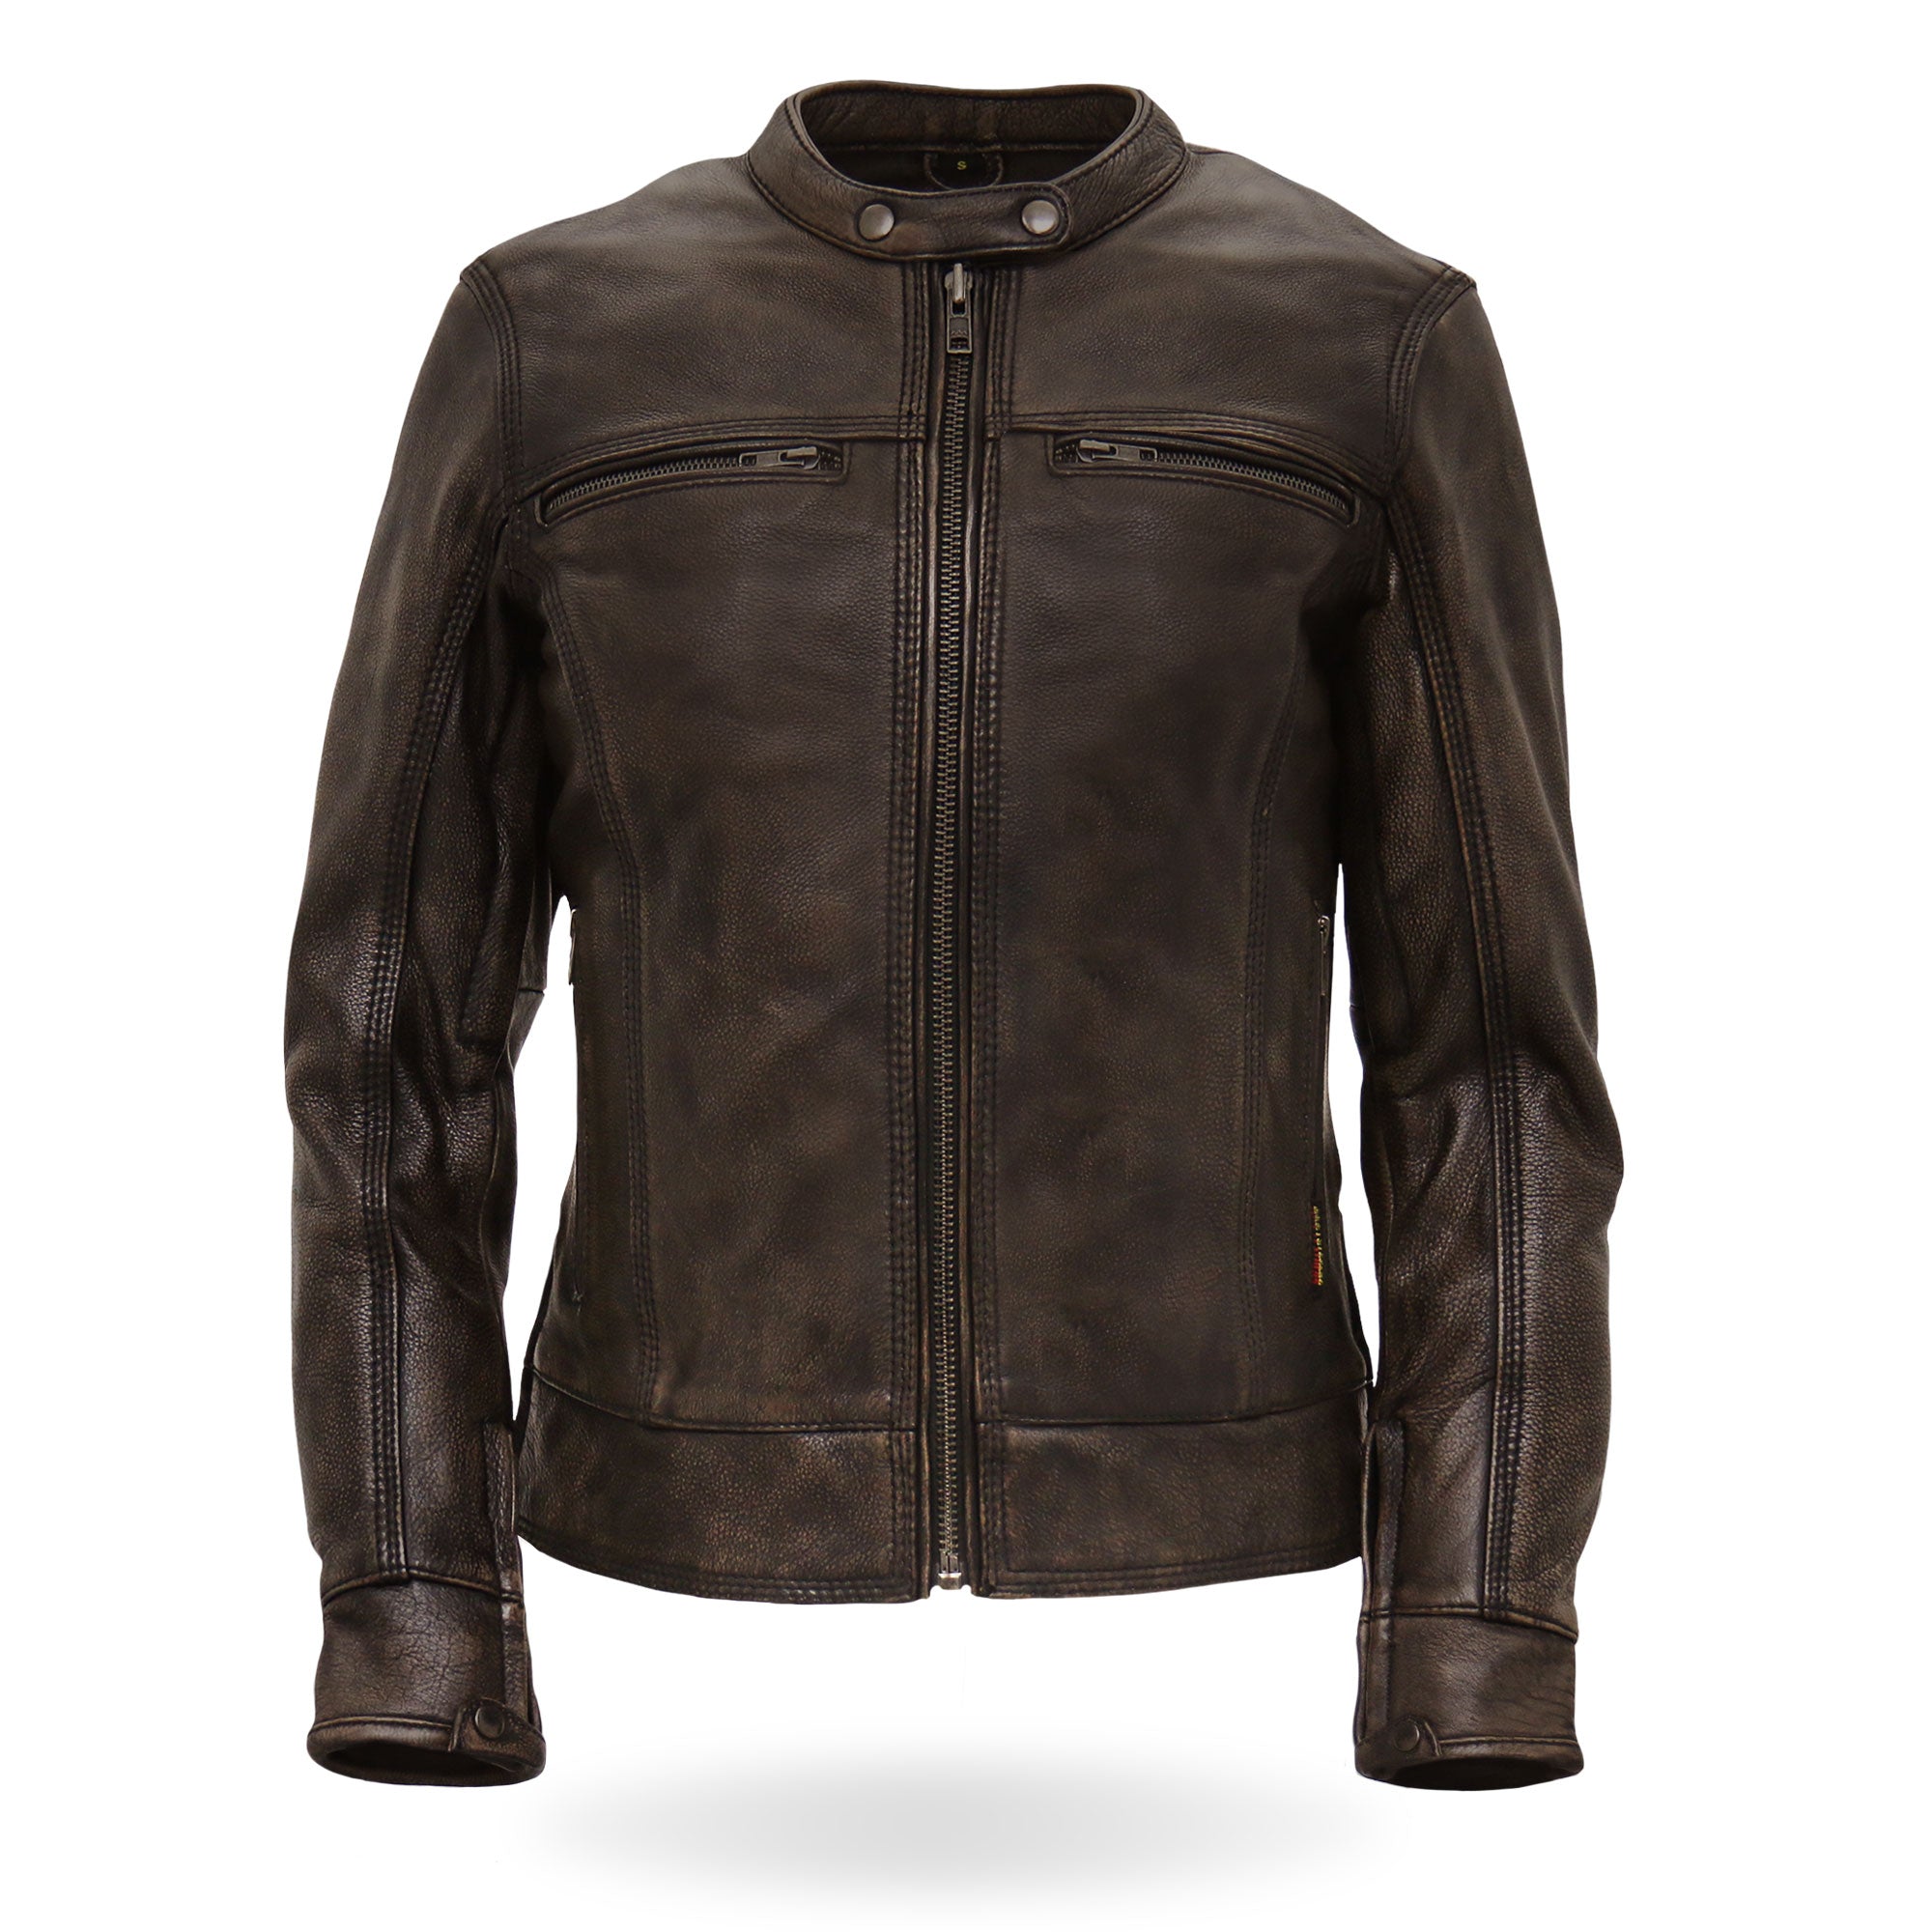 Hot Leathers JKL1024 Ladies Distressed Brown Motorcycle Leather Biker Jacket with  Concealed carry Pockets